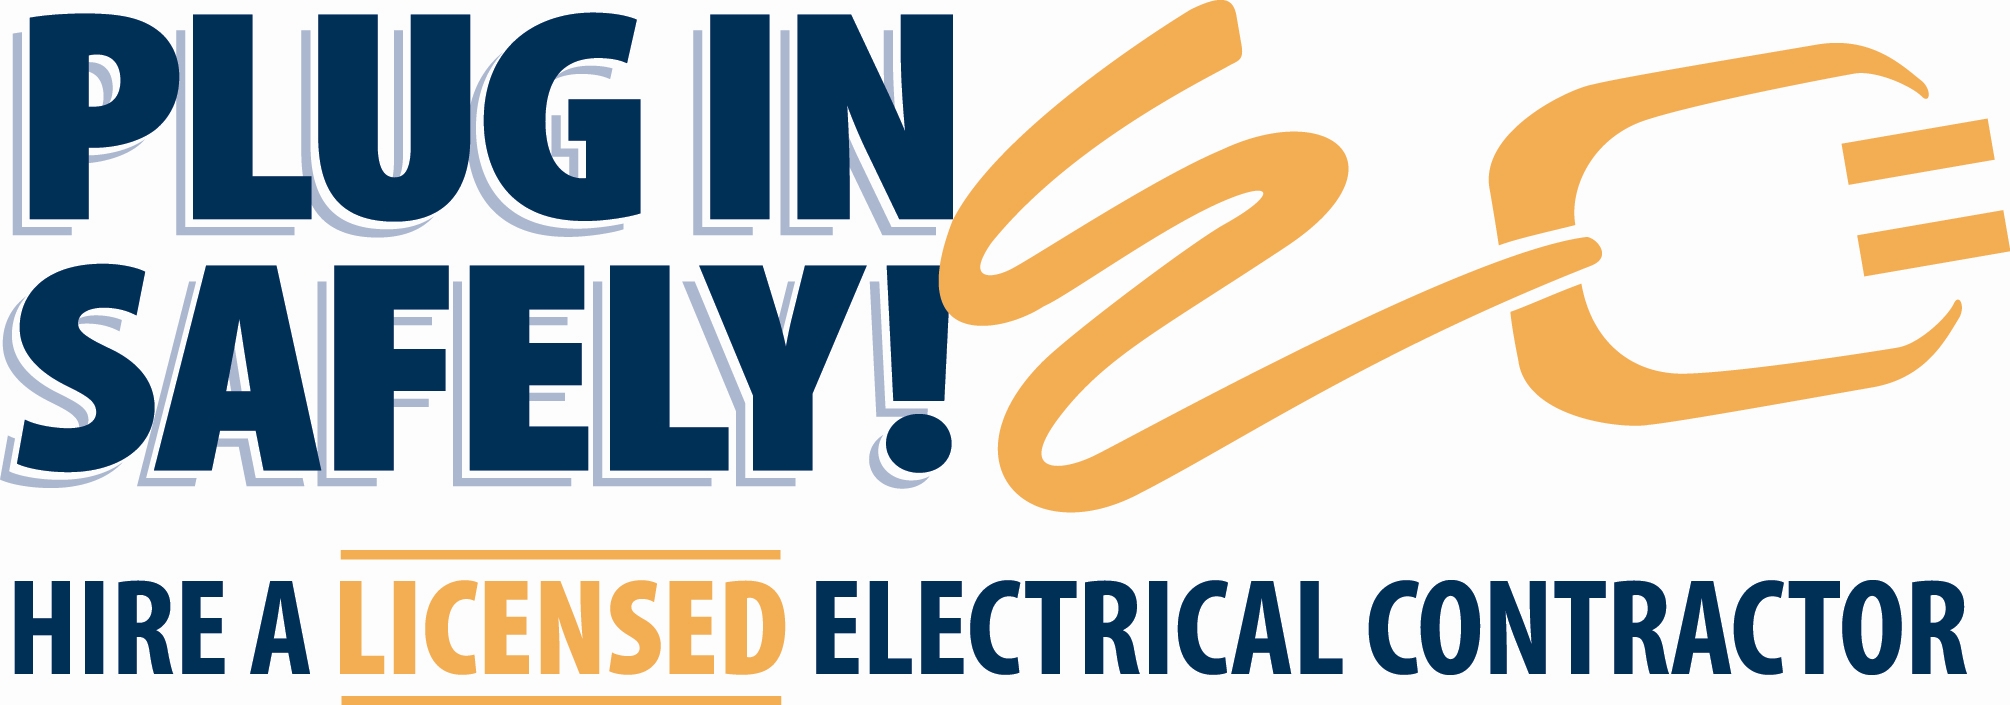 Plug in Safely - Hire a Licensed Contractor Igman Electric